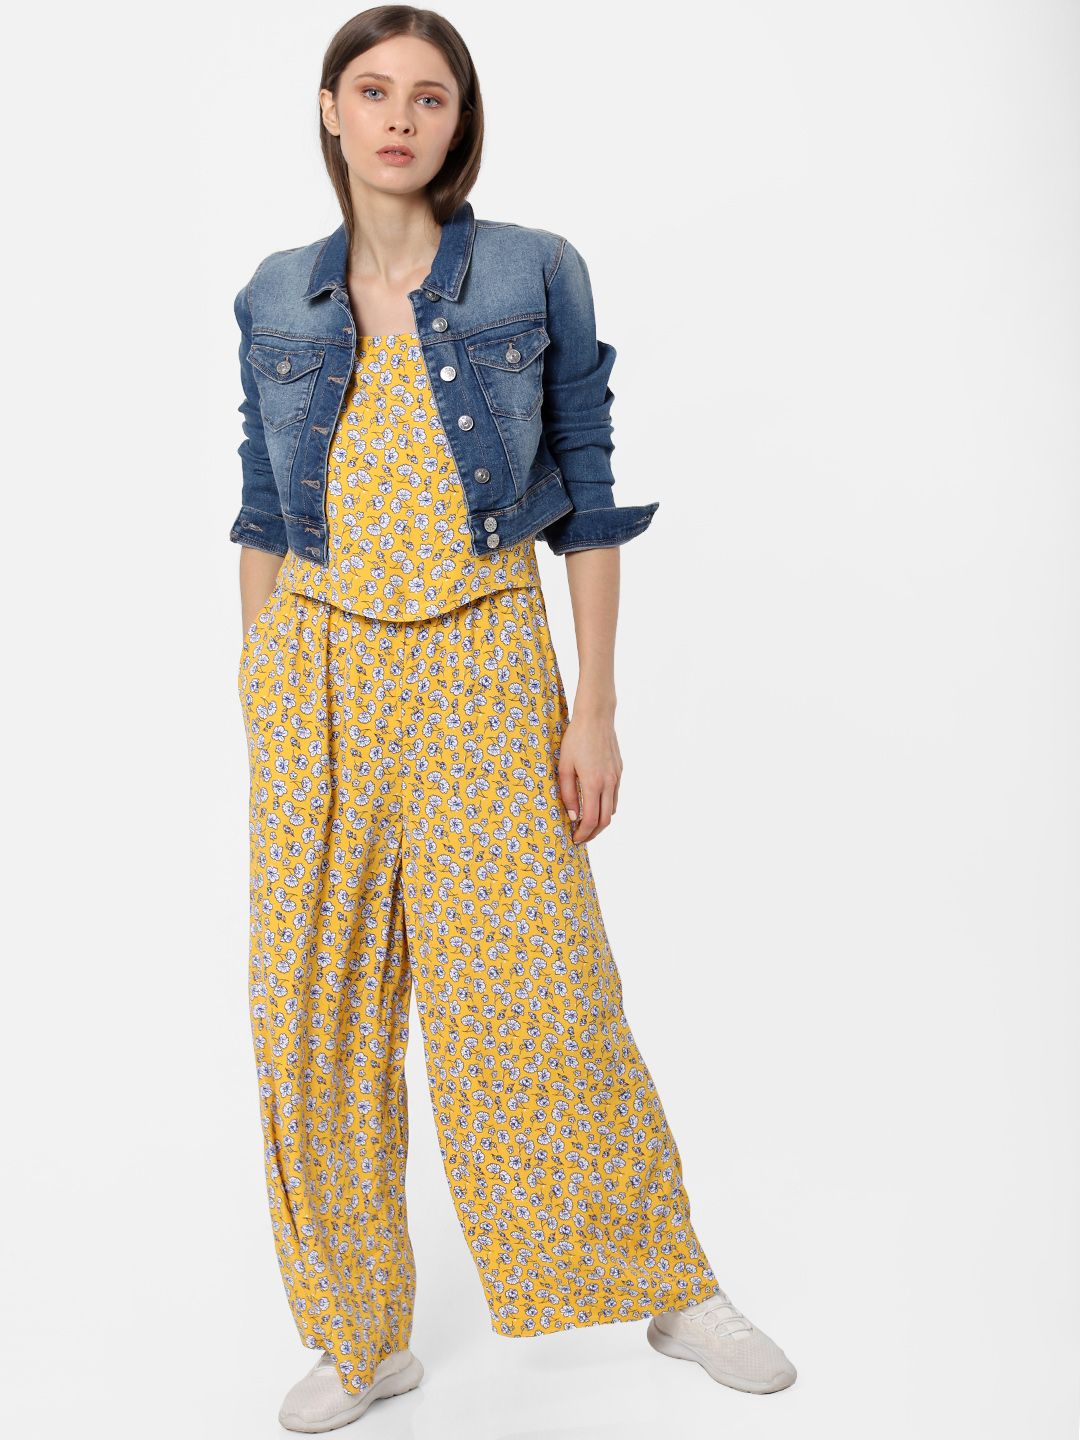 ONLY Women Mustard Yellow & White Floral Printed Basic Jumpsuit Price in India